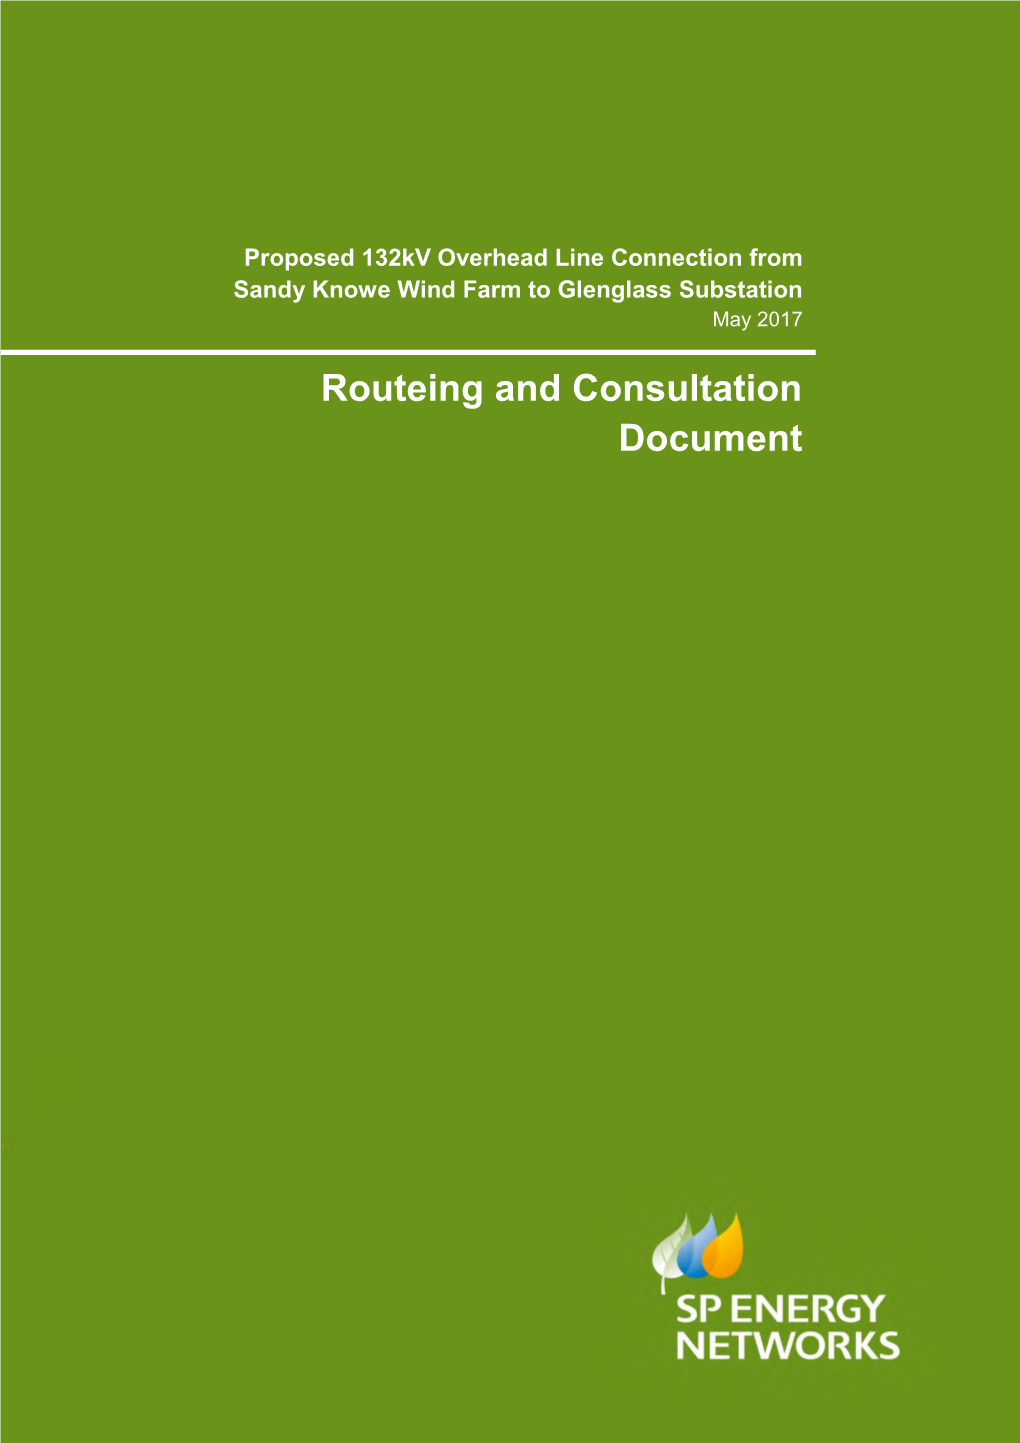 Routeing and Consultation Document